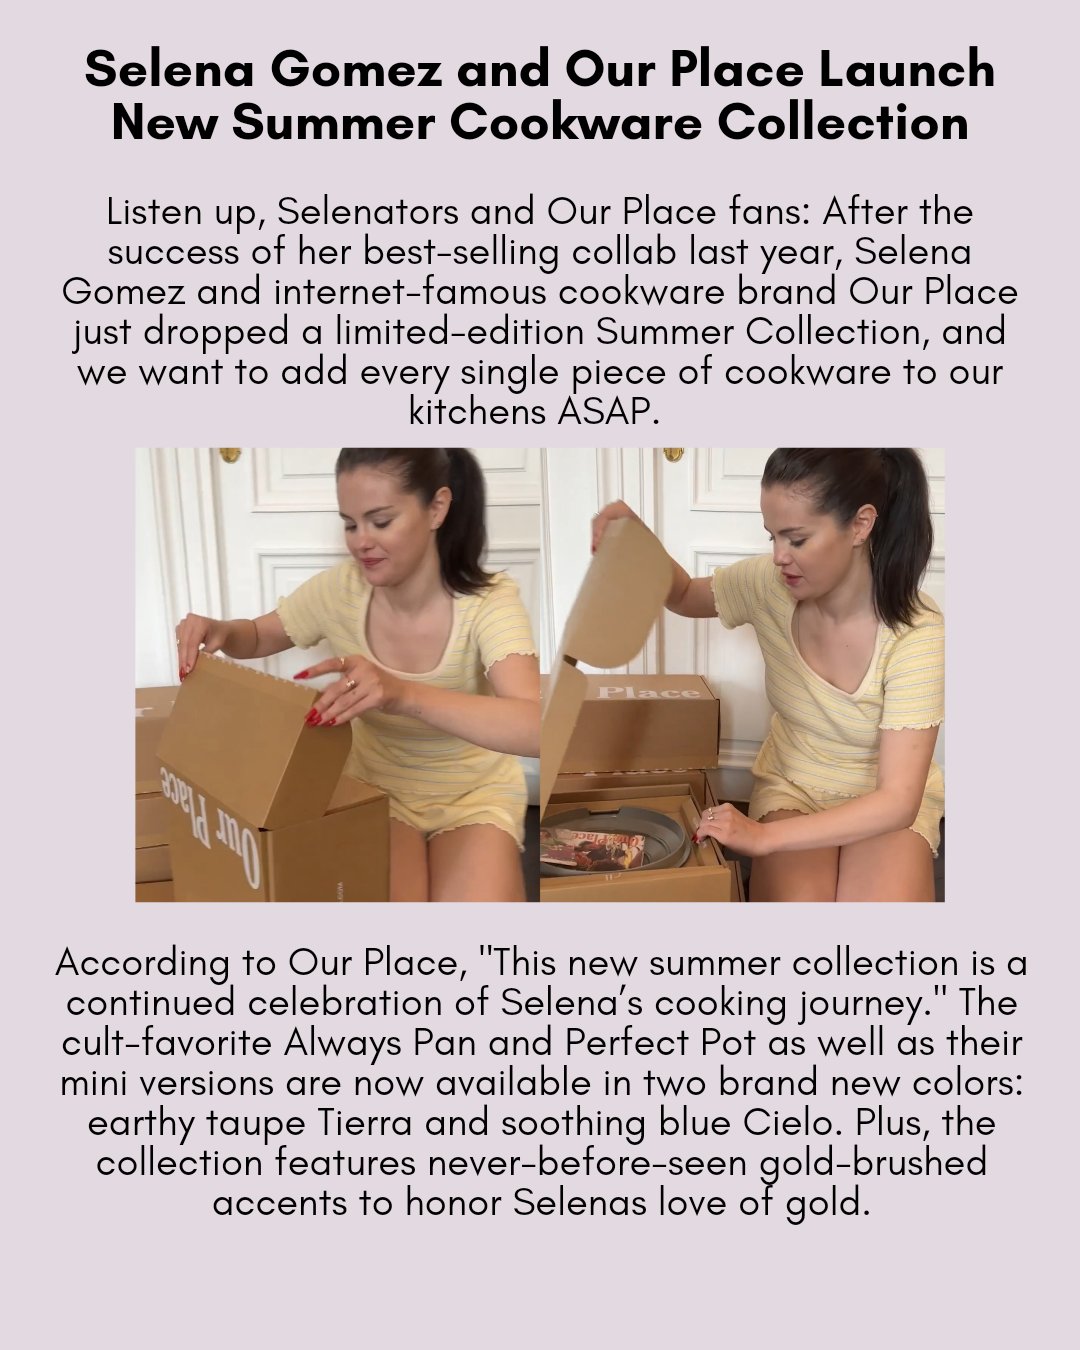 Selena Gomez promoting her Summer Cookware Collection with OurPlace.  Available for purchase at…